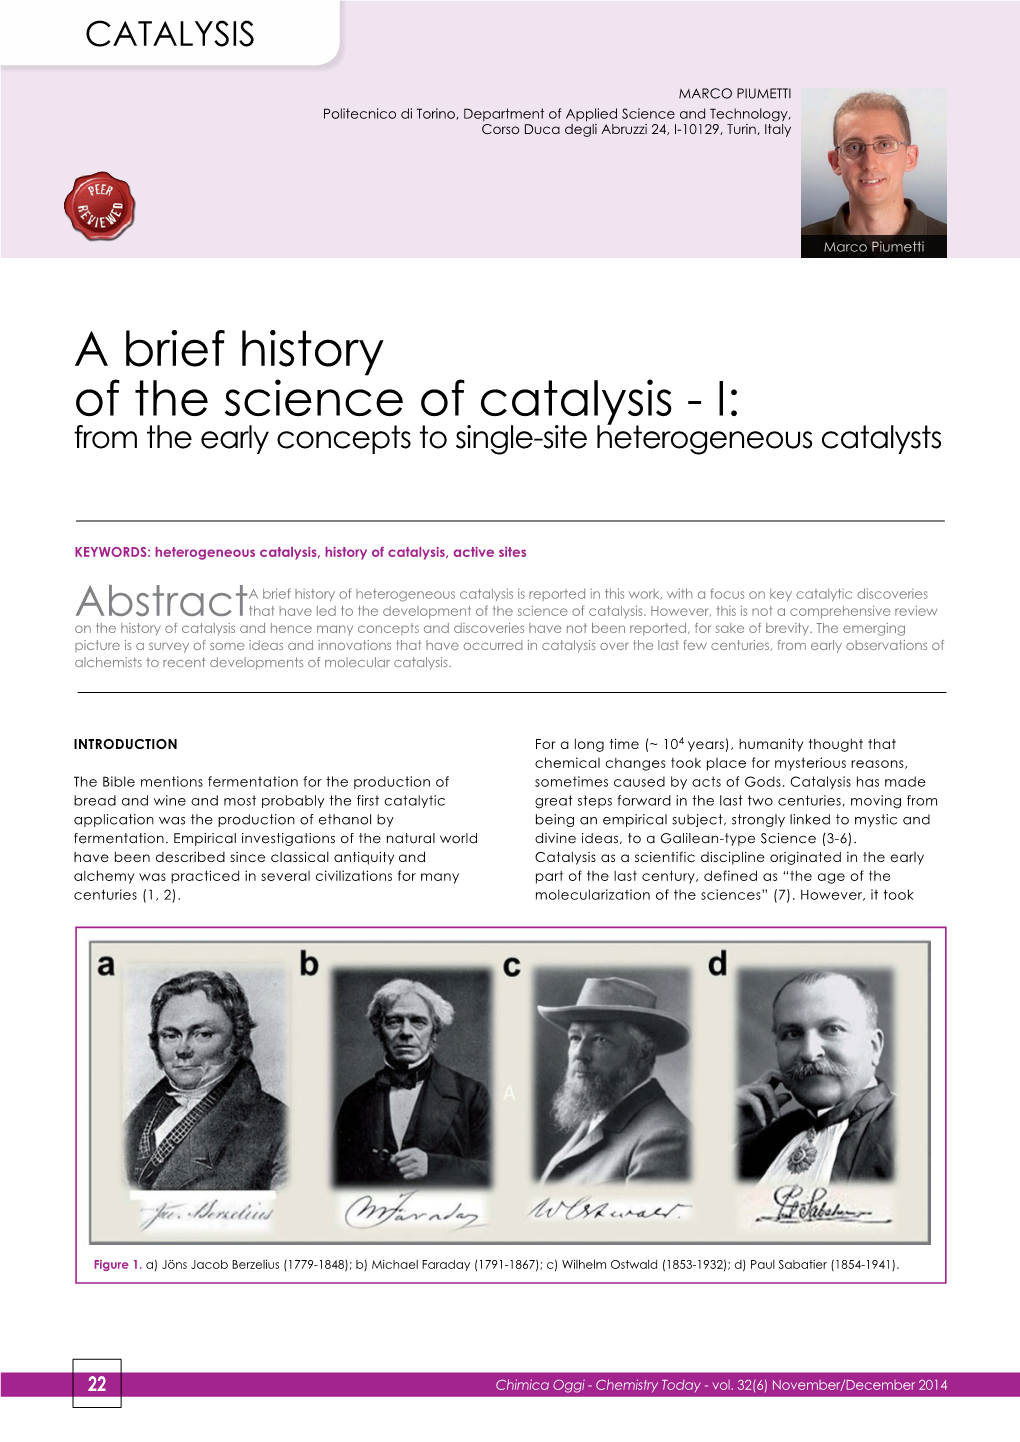 A Brief History of the Science of Catalysis - I: from the Early Concepts to Single-Site Heterogeneous Catalysts